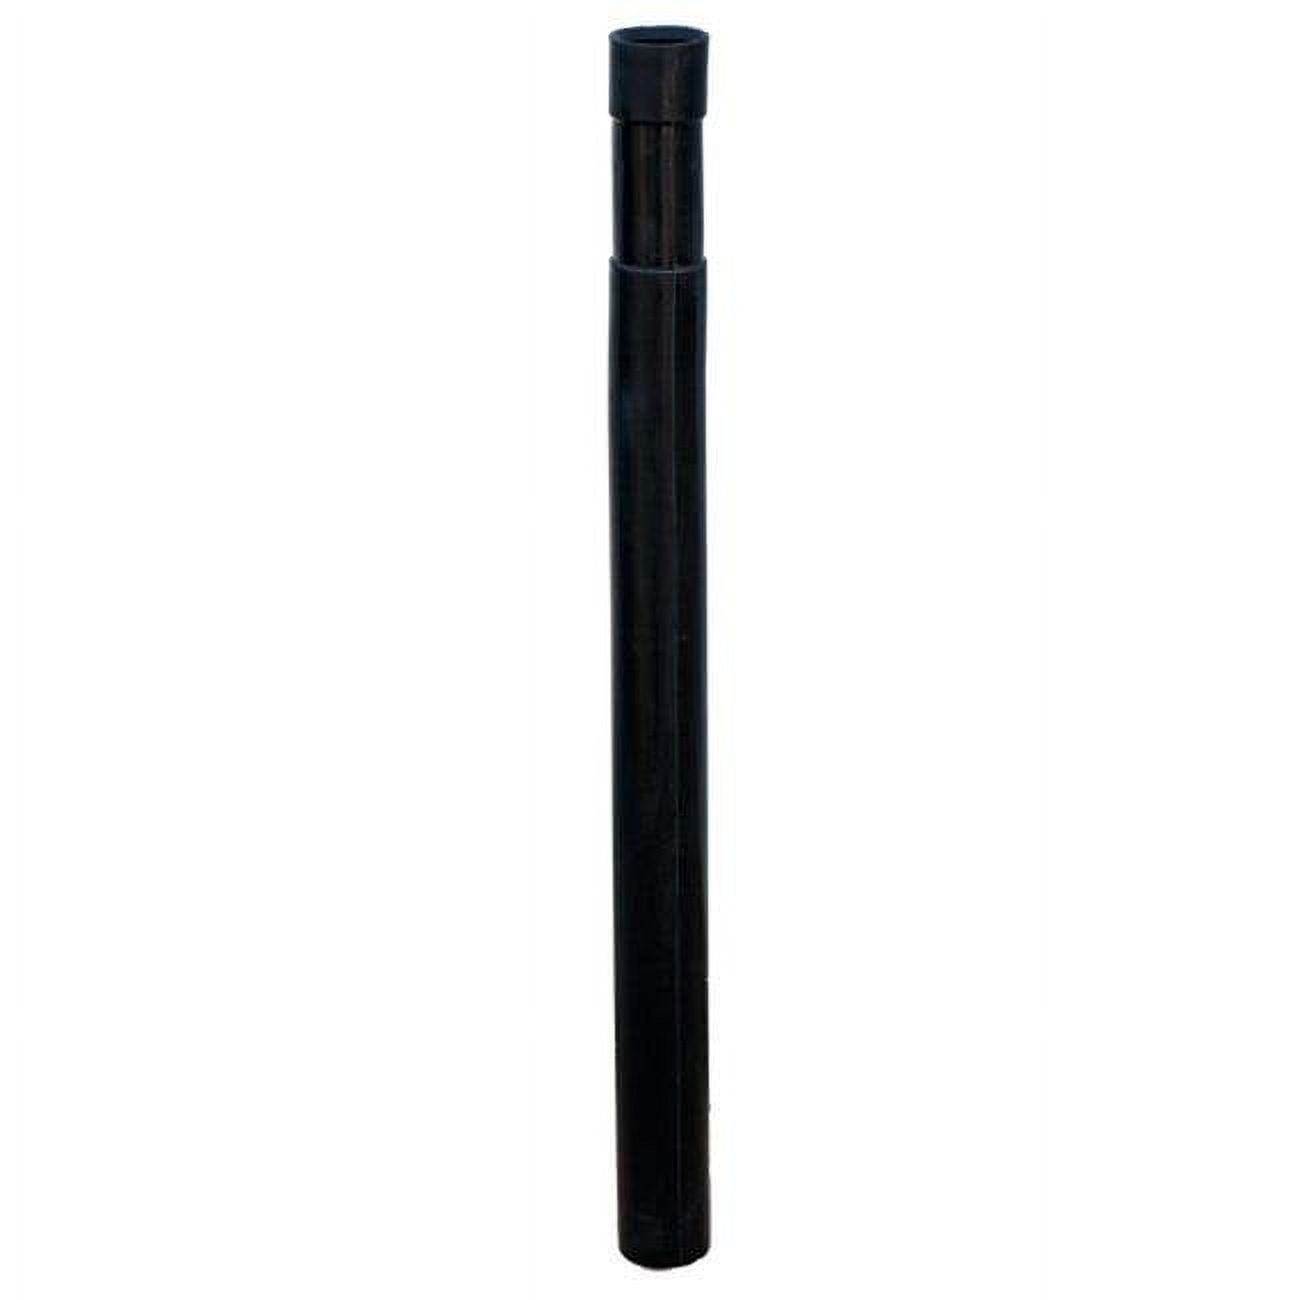 Picture of Champion Sports 90T Replacement Batting Tee Tube, Black